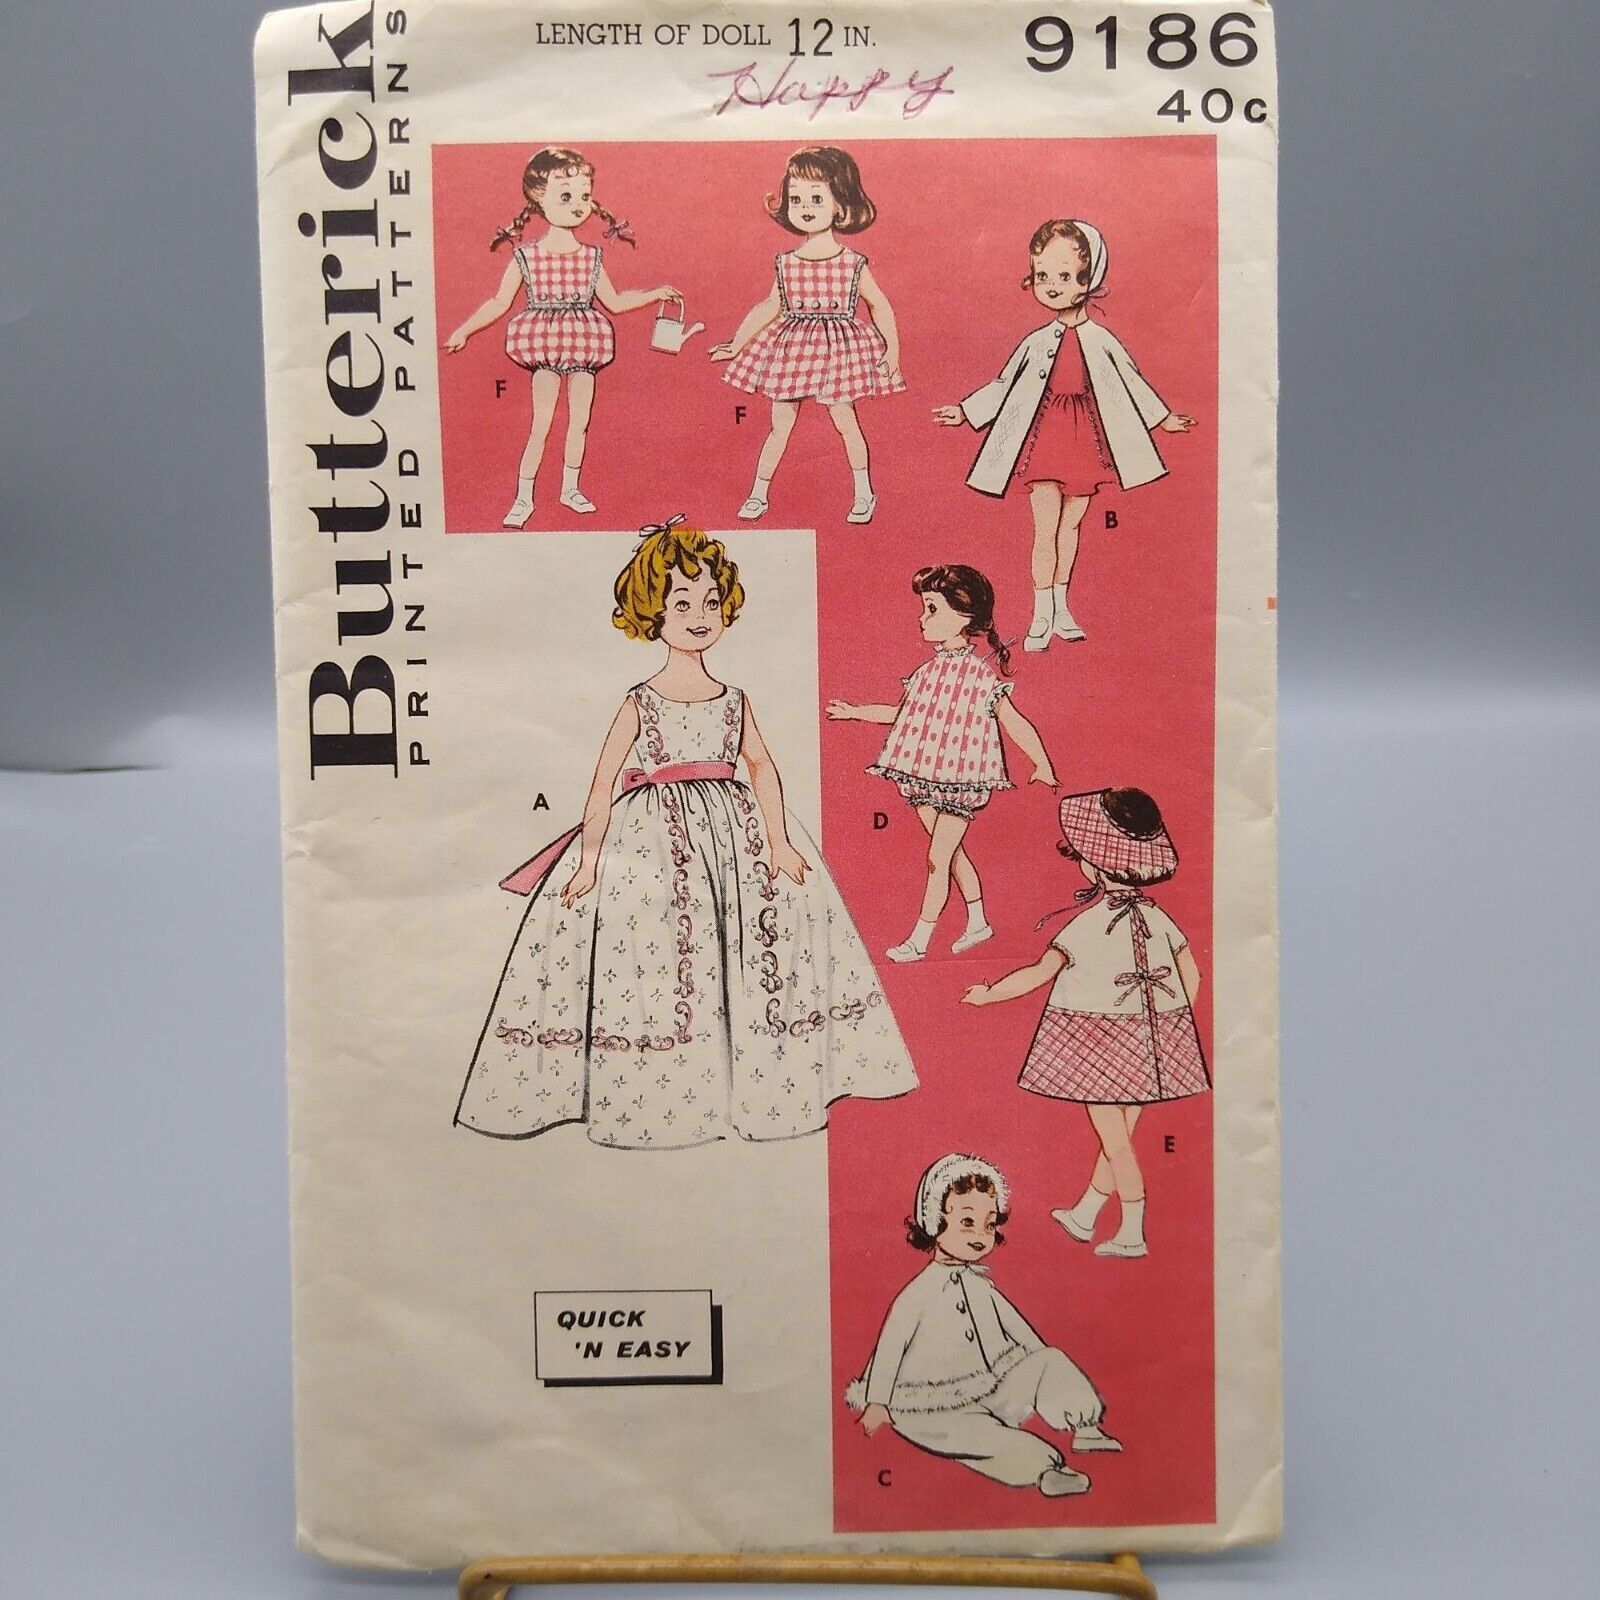 Primary image for Vintage Craft Sewing PATTERN Butterick 9186, Little Girl Dolls Clothes 1950s